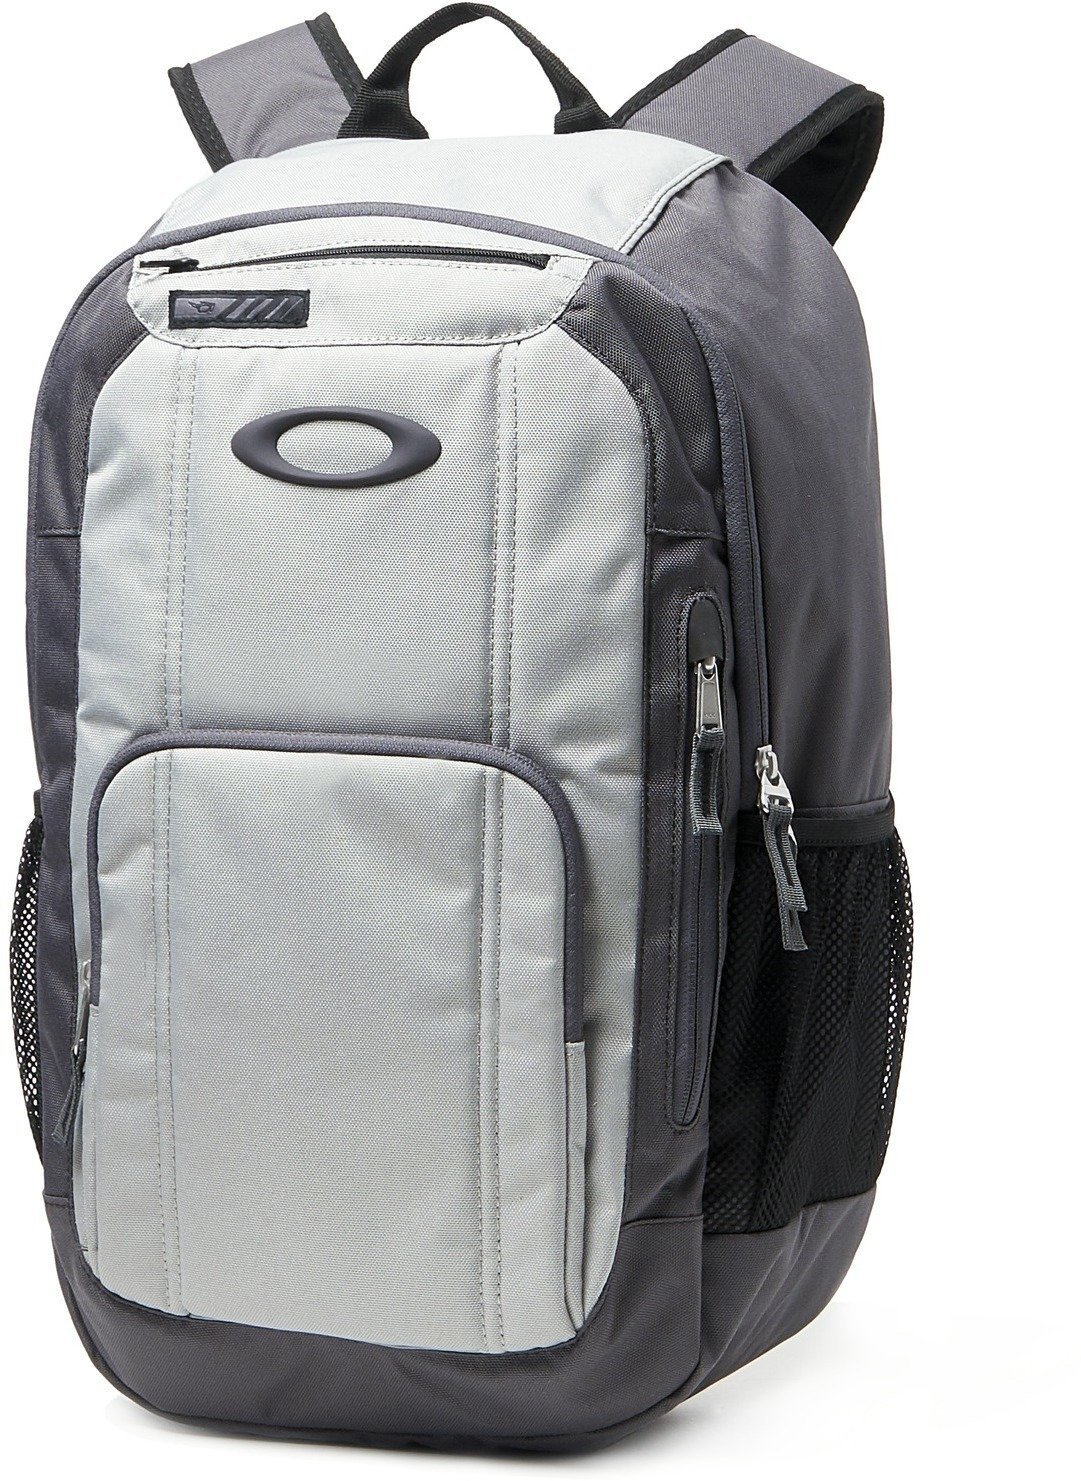 Lifestyle Backpack / Bag Oakley Enduro 25L 2.0 Forged Iron 25 L Backpack